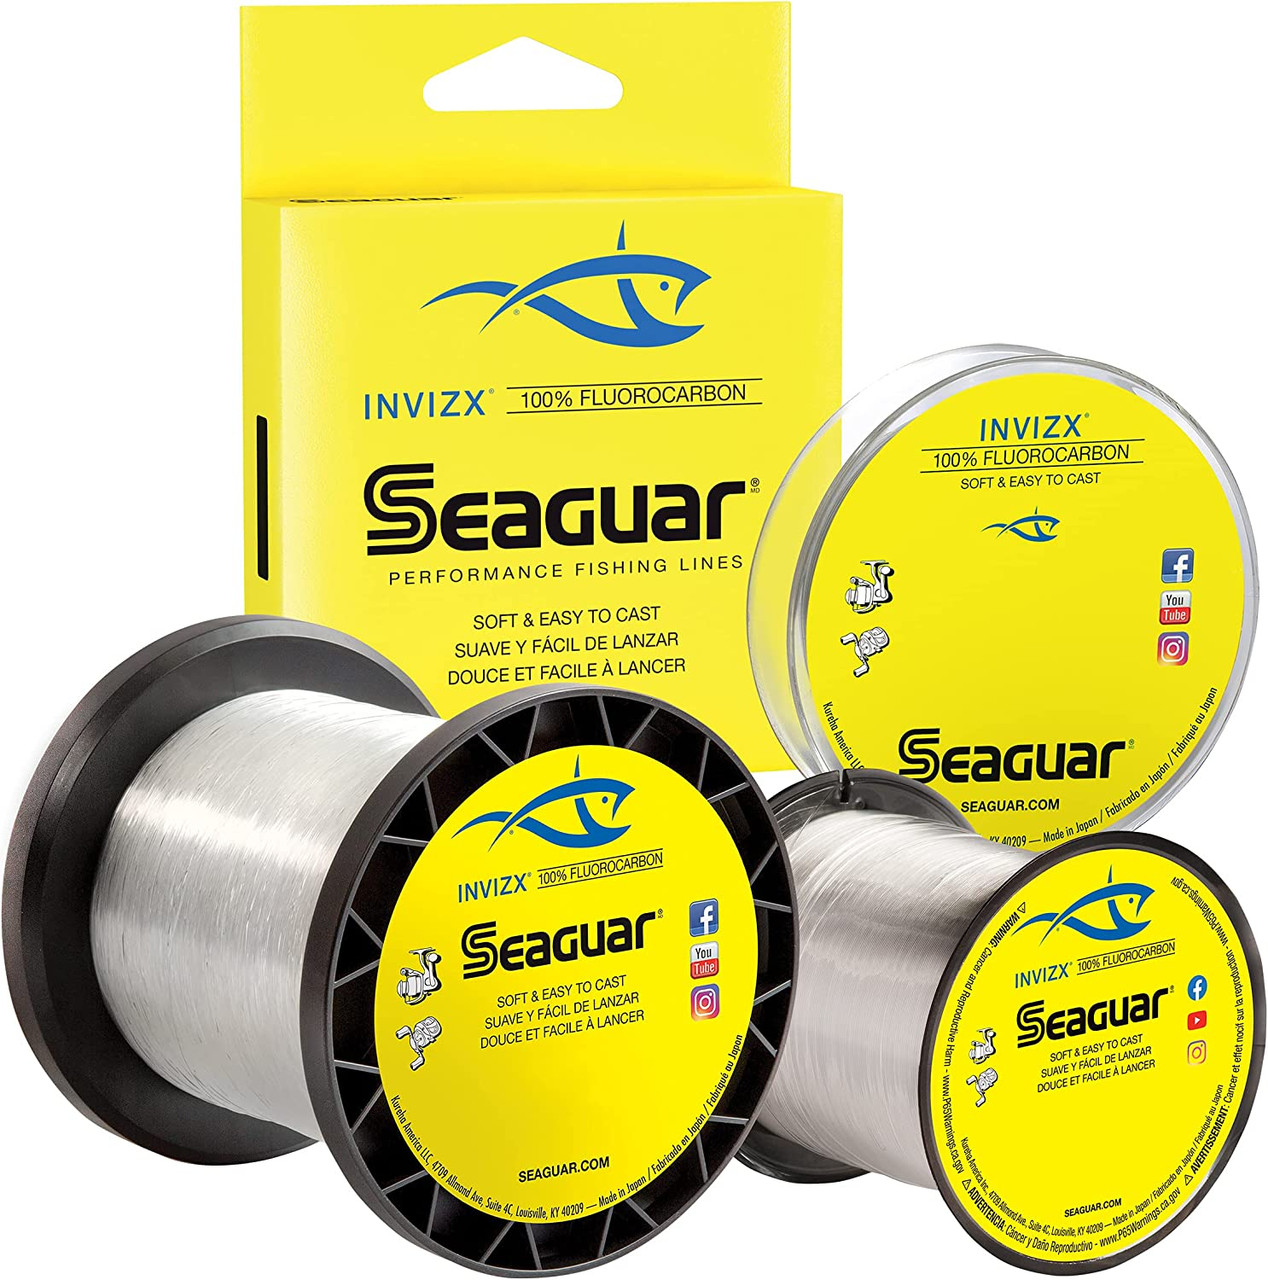 100% Fluorocarbon Leader Fishing Line from Blood Run Fishing